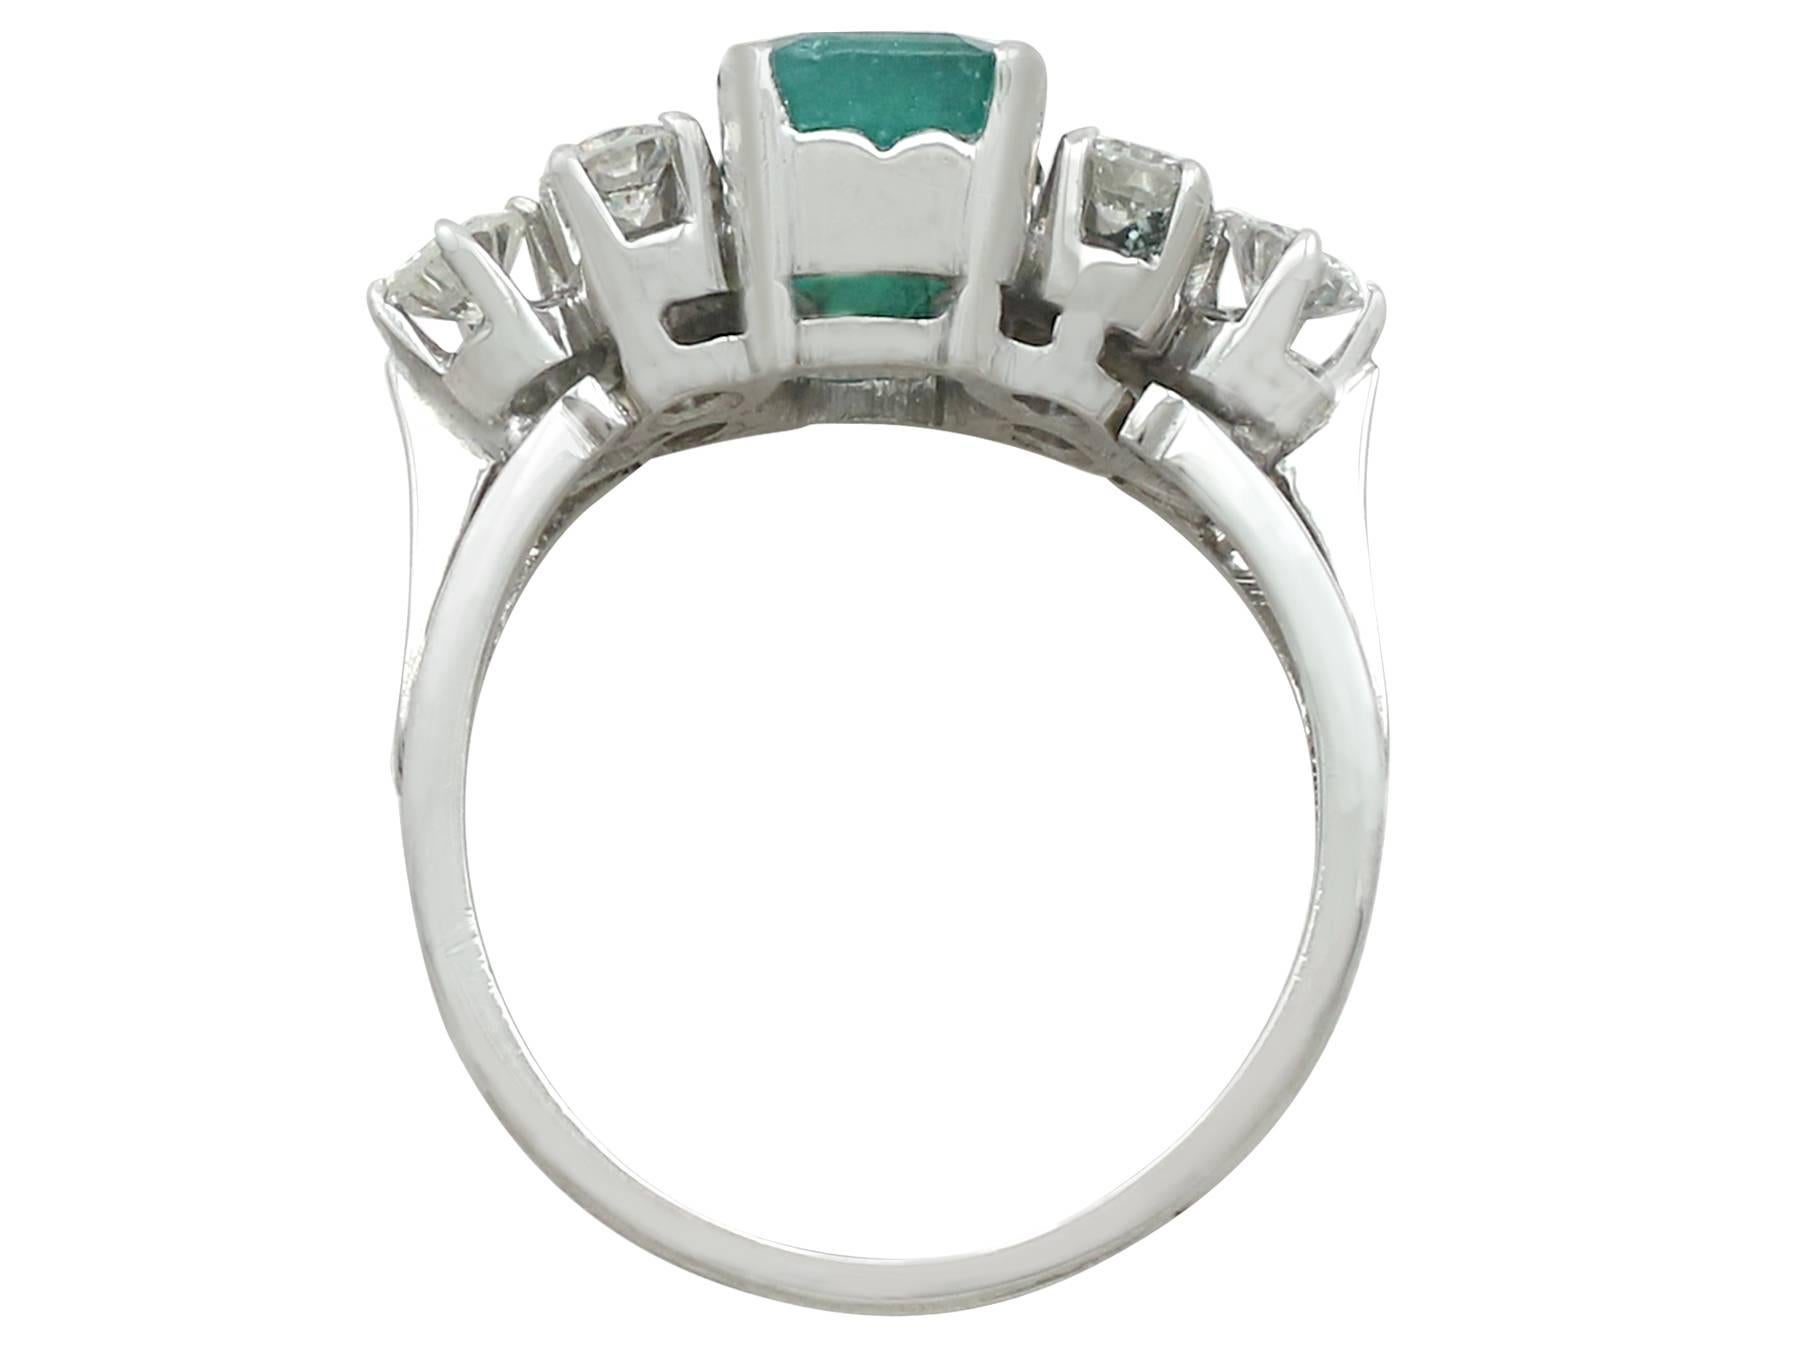 An impressive vintage 1.61 Ct emerald and 1.32 Ct diamond, 18k and 15k white gold dress ring; part of our diverse vintage jewelry and collections.

This fine and impressive emerald cut emerald ring with diamonds has been crafted in 18k white gold